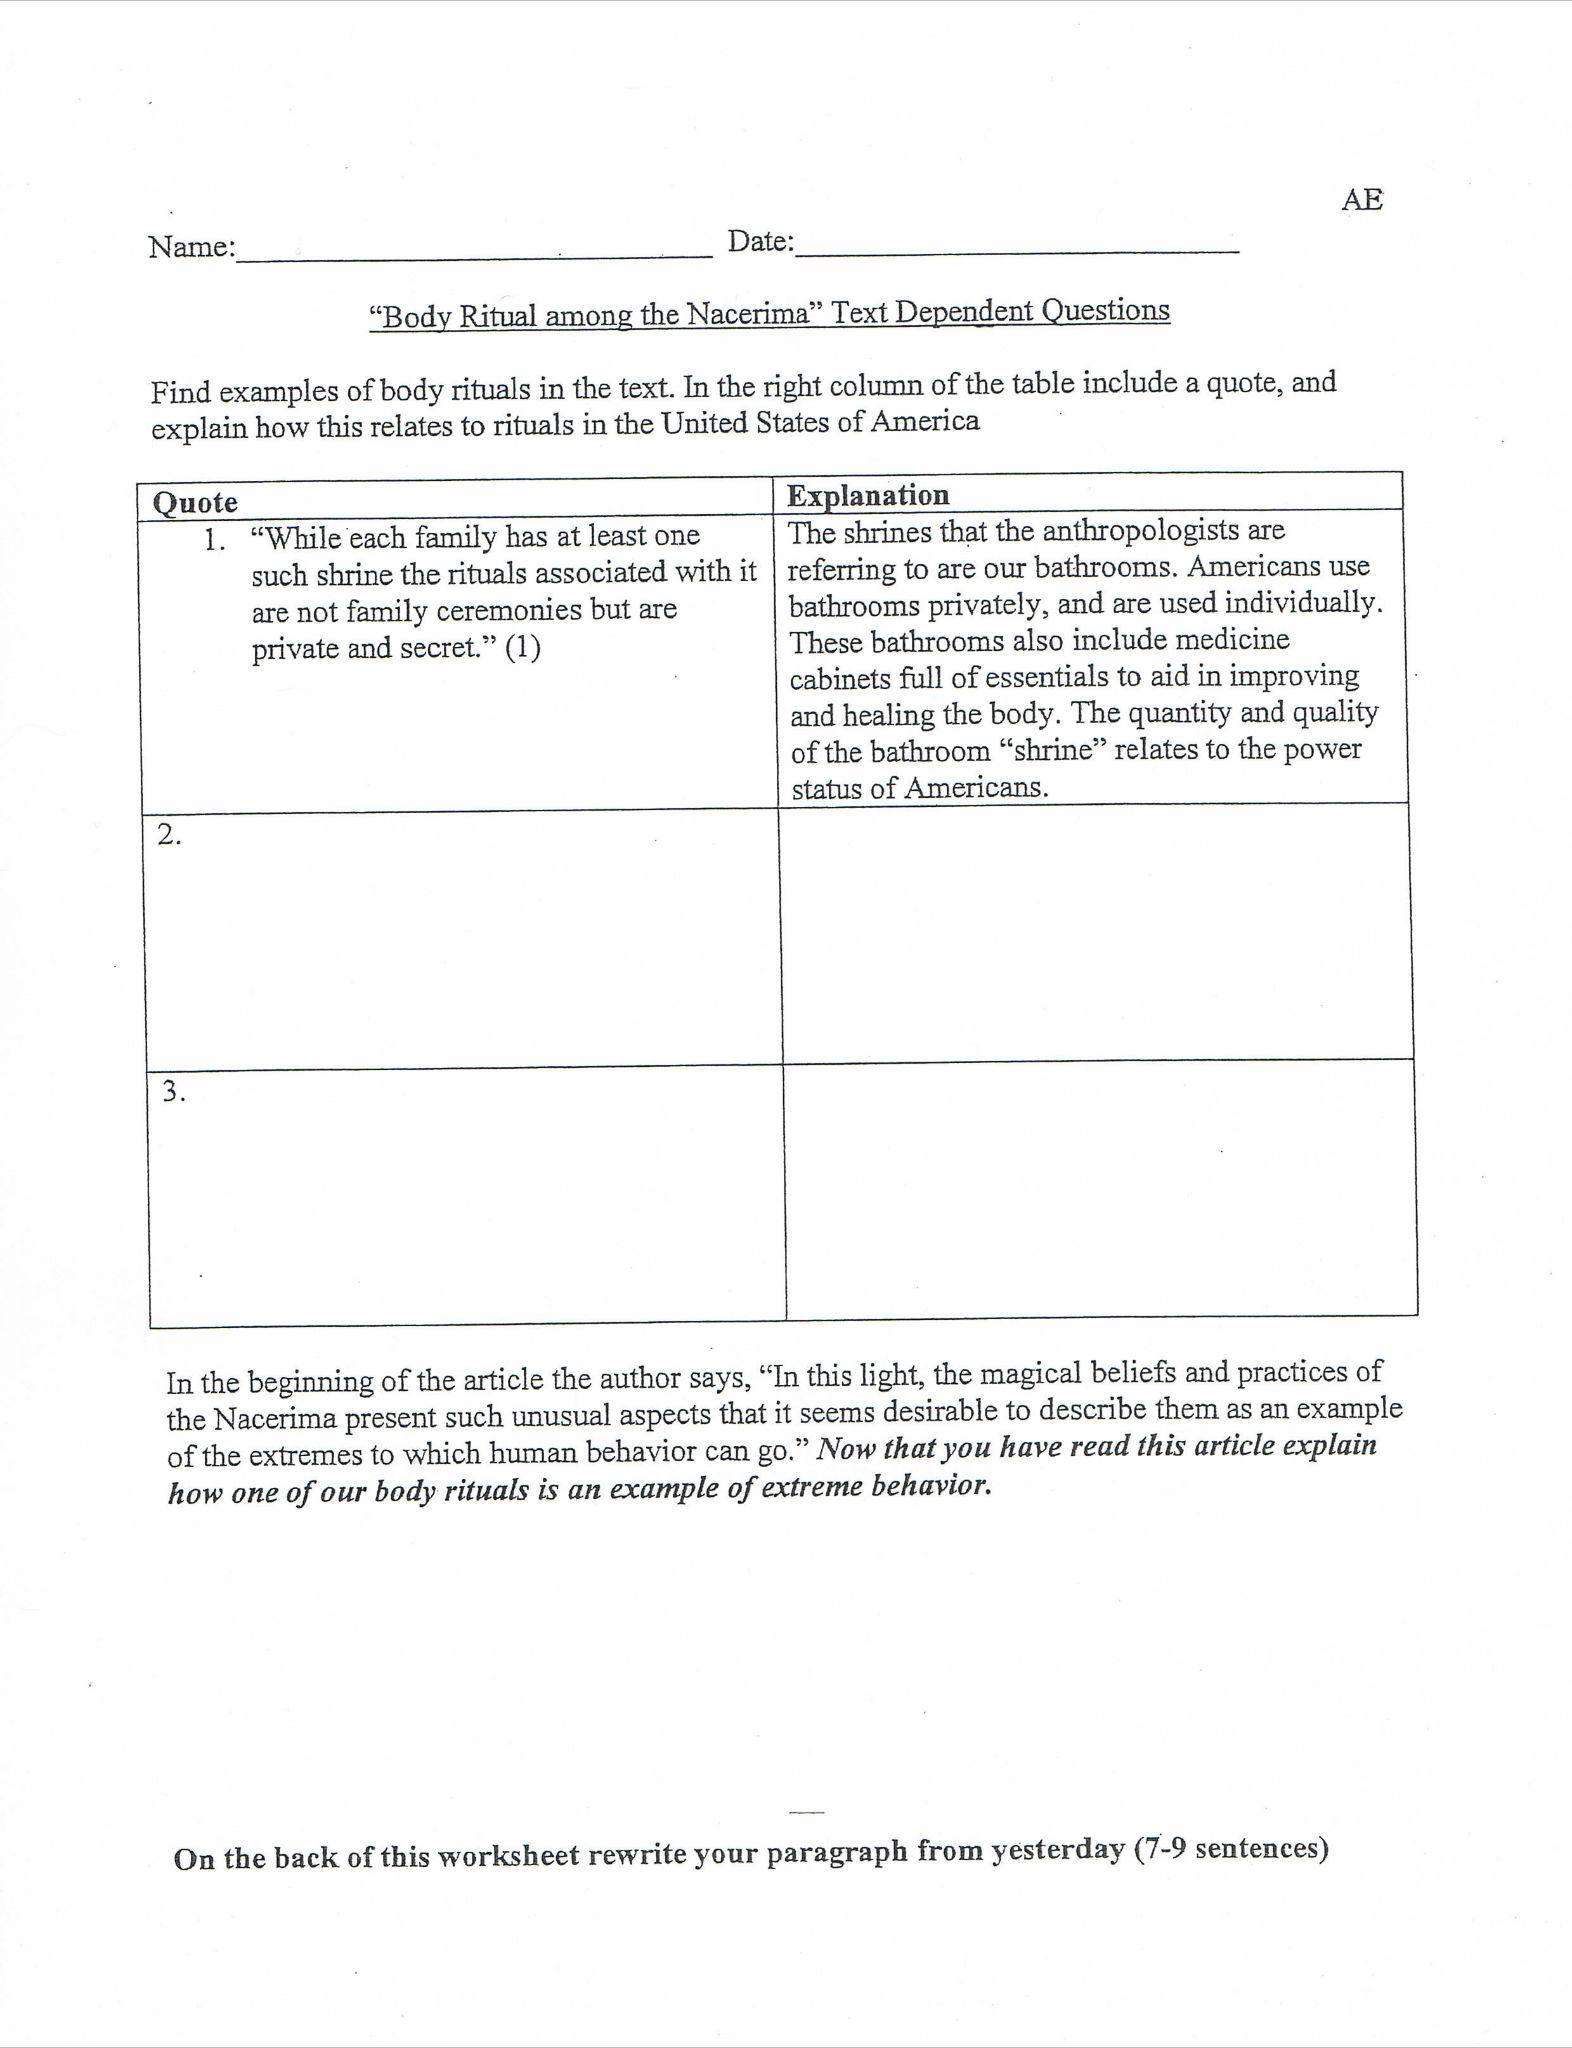 lunchroom-fight-the-evidence-worksheet-answer-key-waltery-learning-solution-for-student